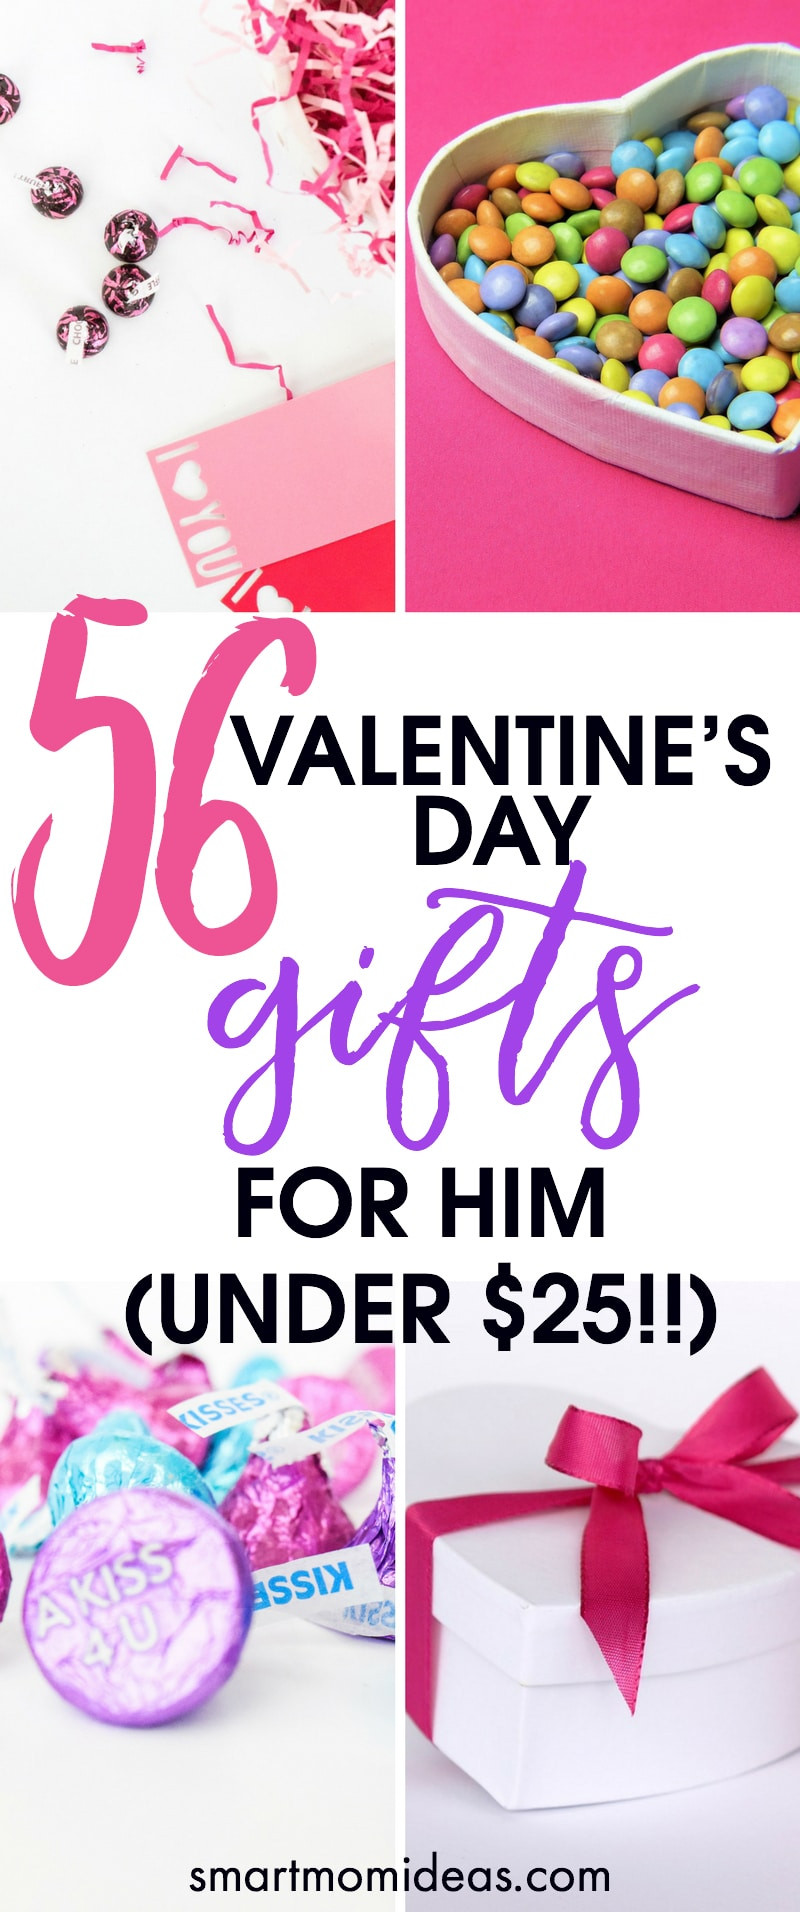 Valentines For Him Gift Ideas
 56 Valentine’s Day Gifts for Him Under $25